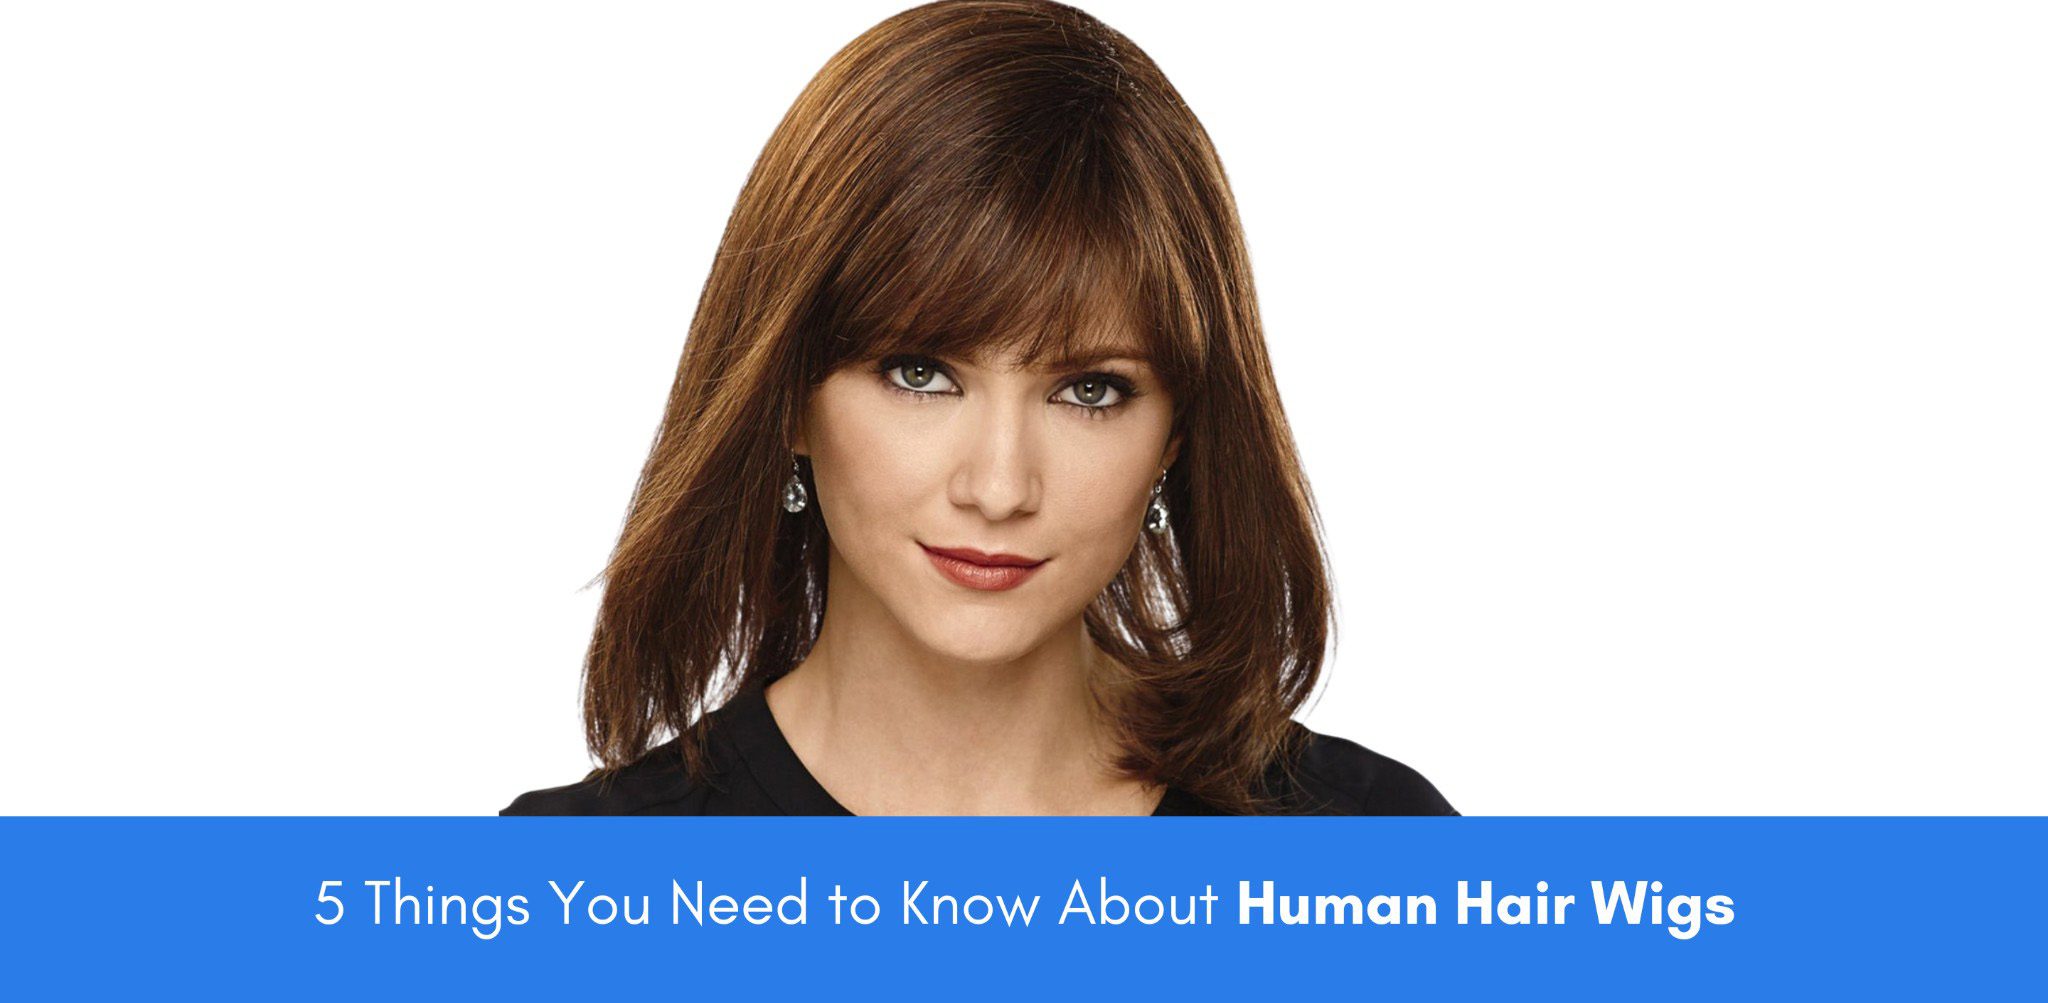 5 things you need to know about human hair wigs